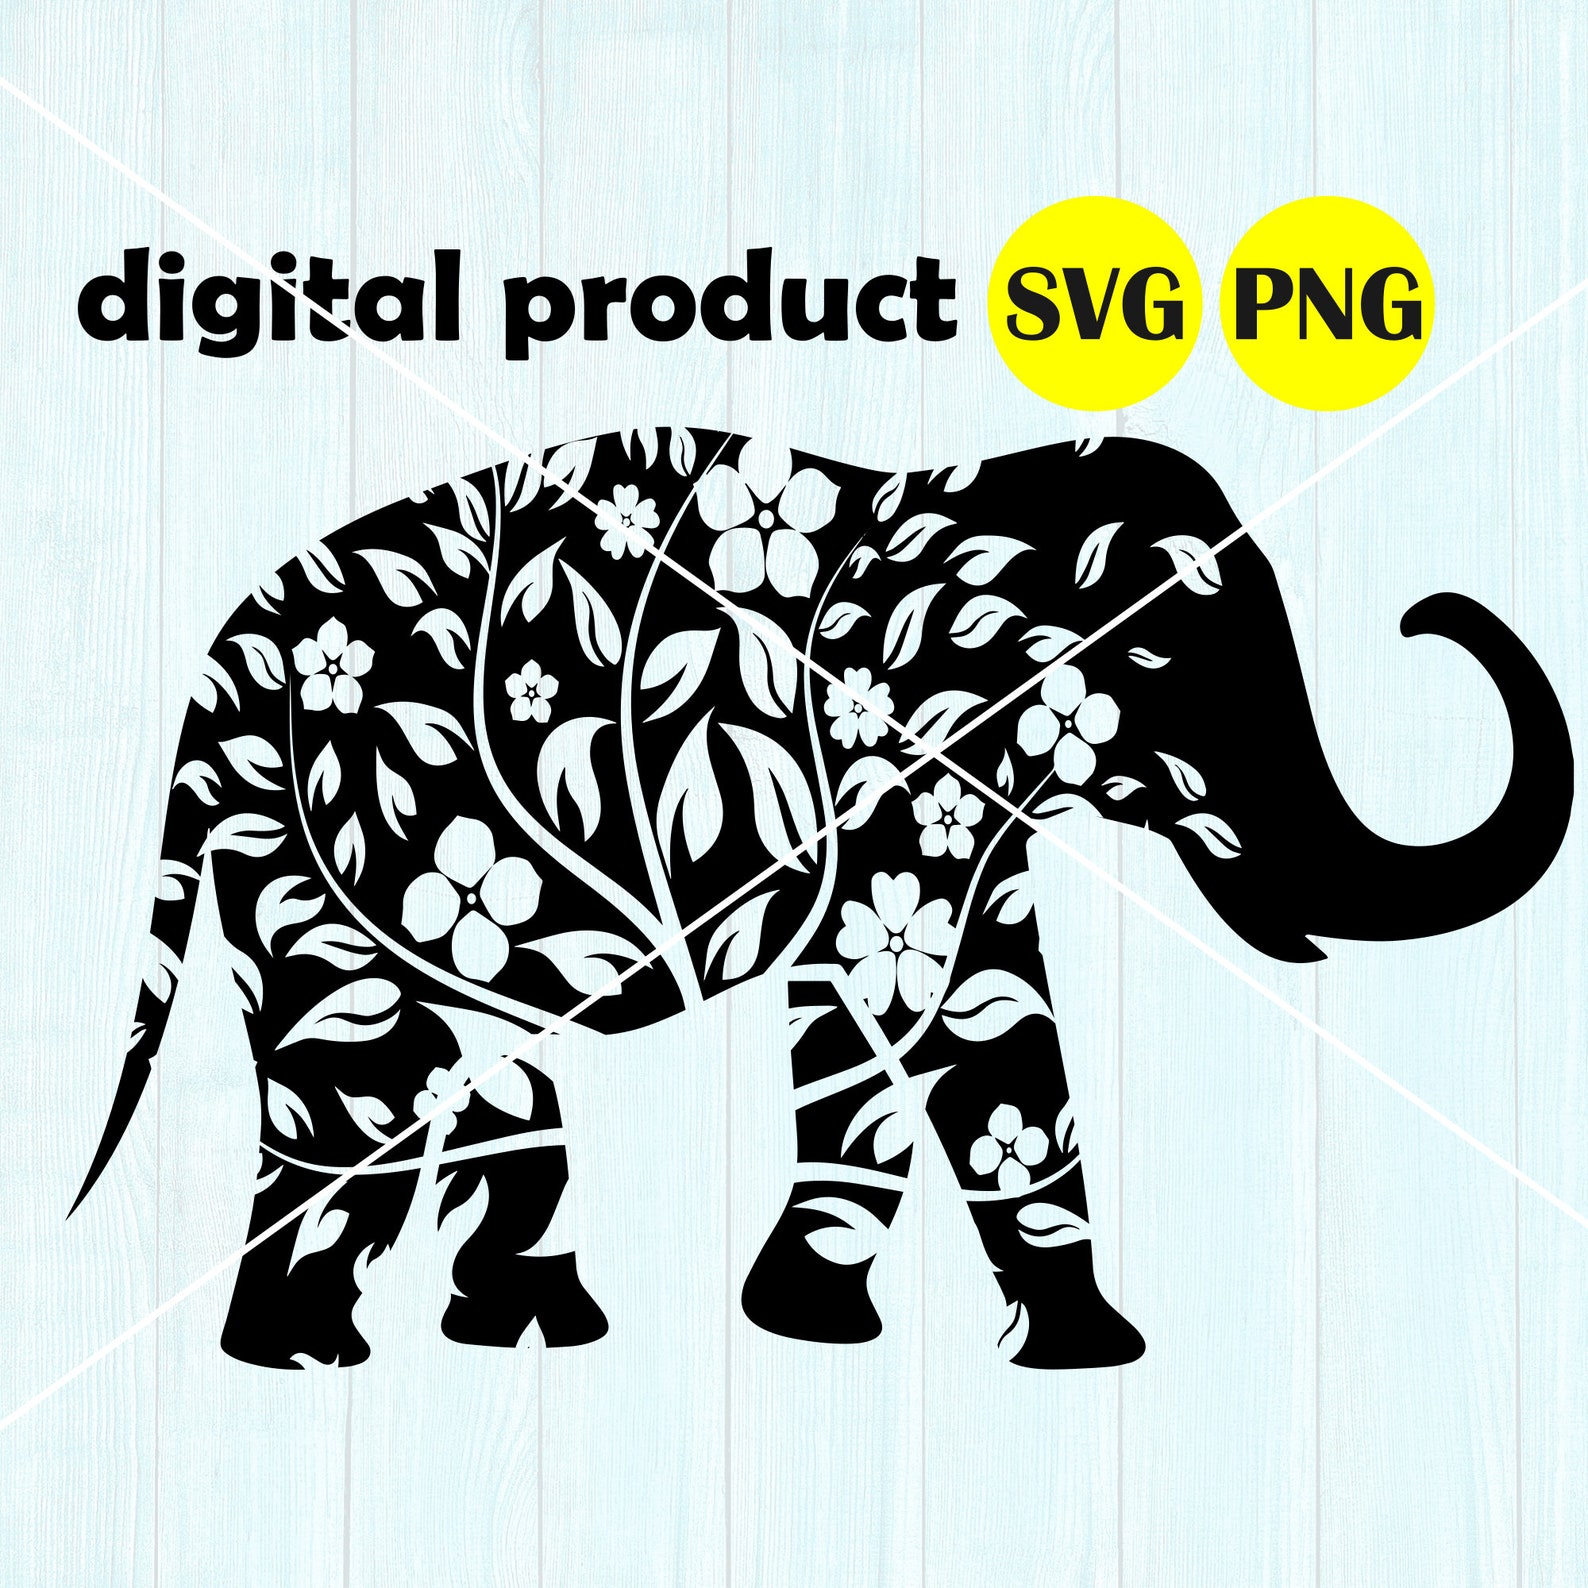 This is a digital product in PNG & SVG formats.